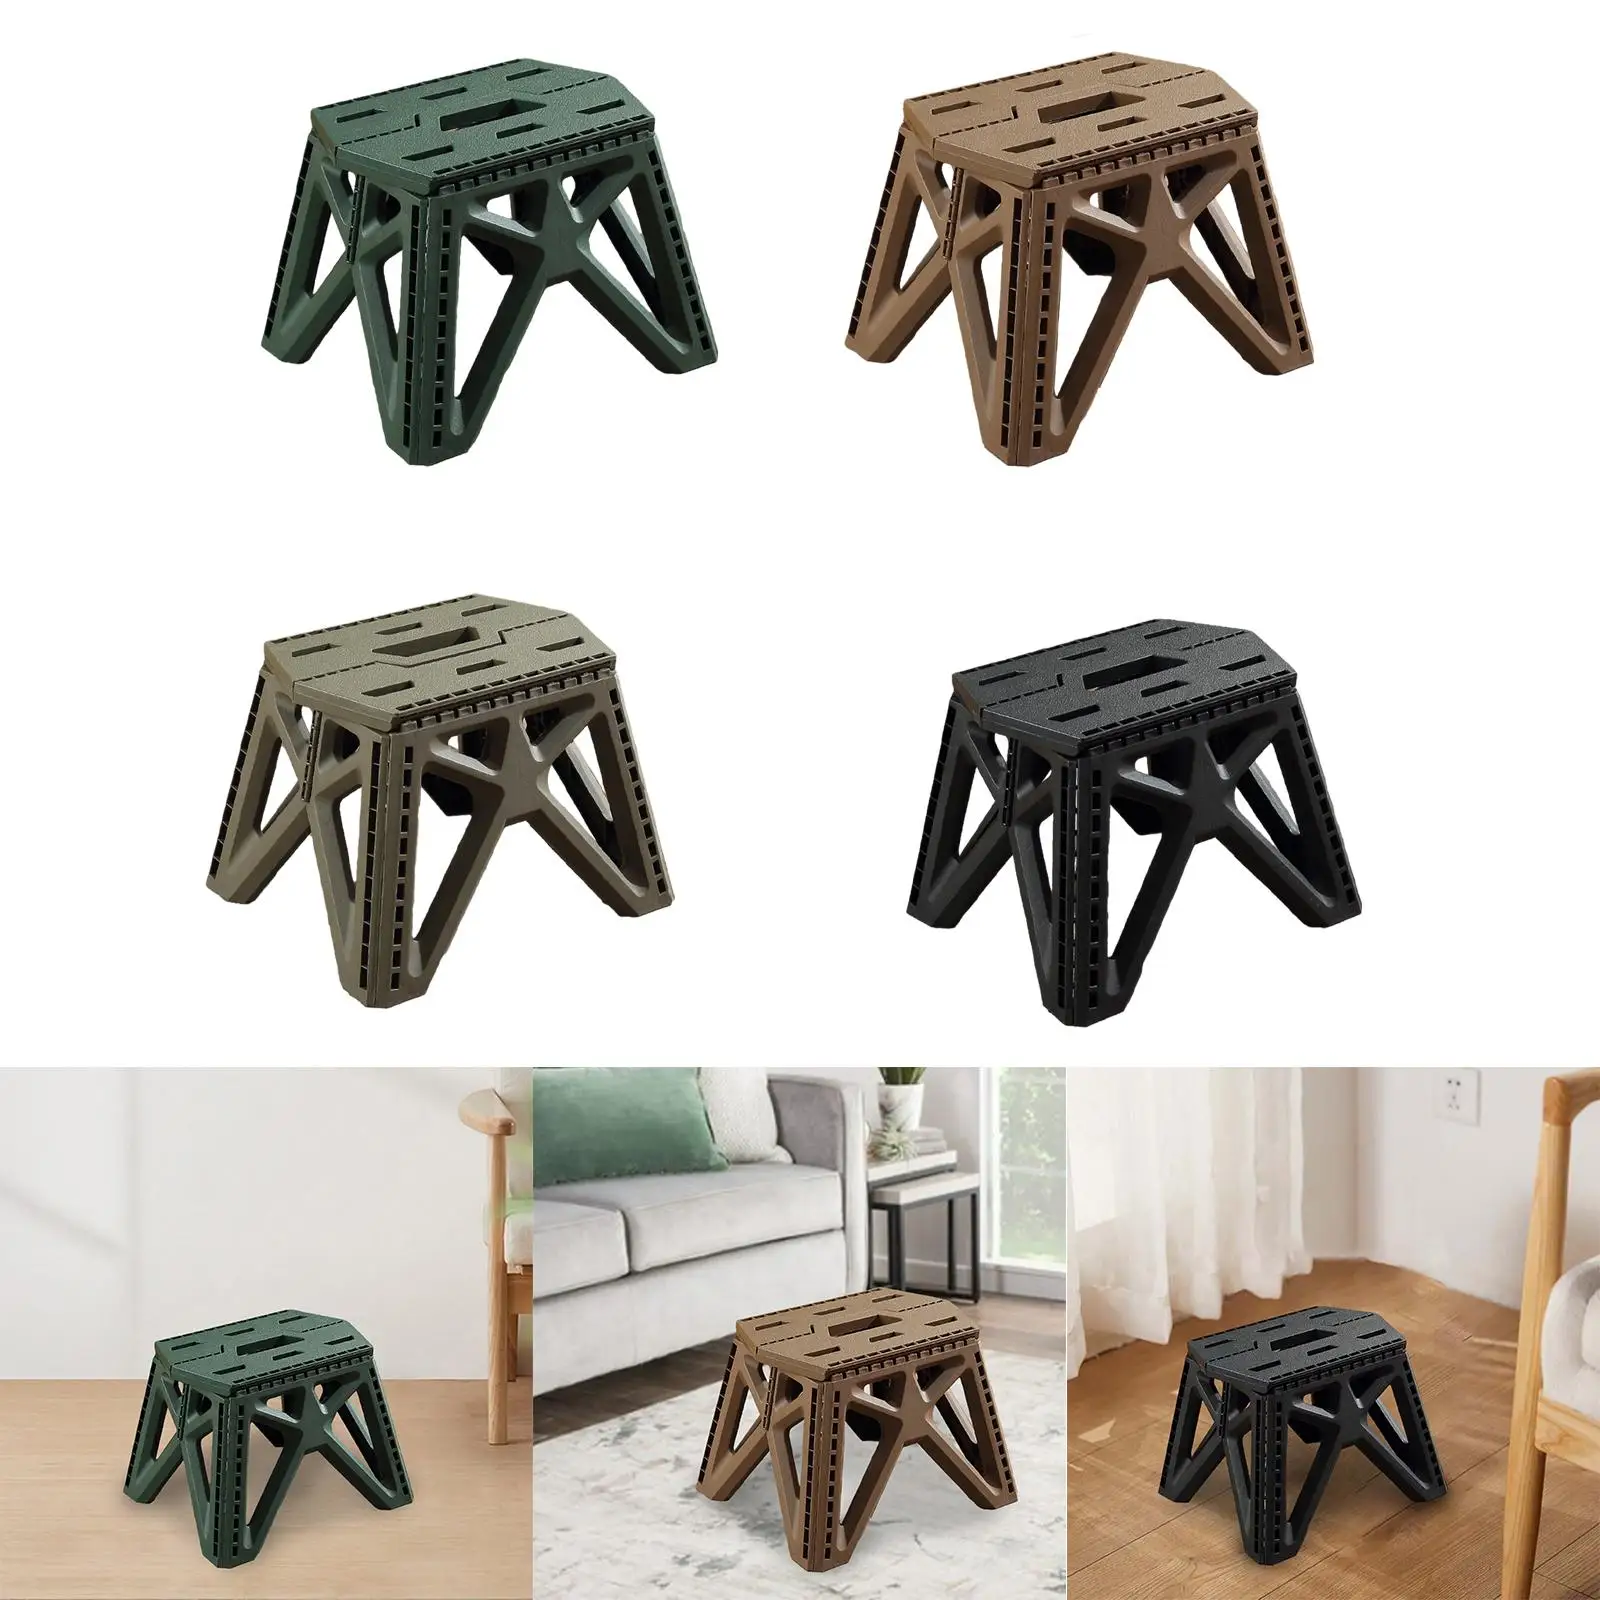 Camping Folding Stool Outside Compact Camp Stool Camping Chair Outdoor Foldable Stool for Garden Backpacking Beach Fishing Patio